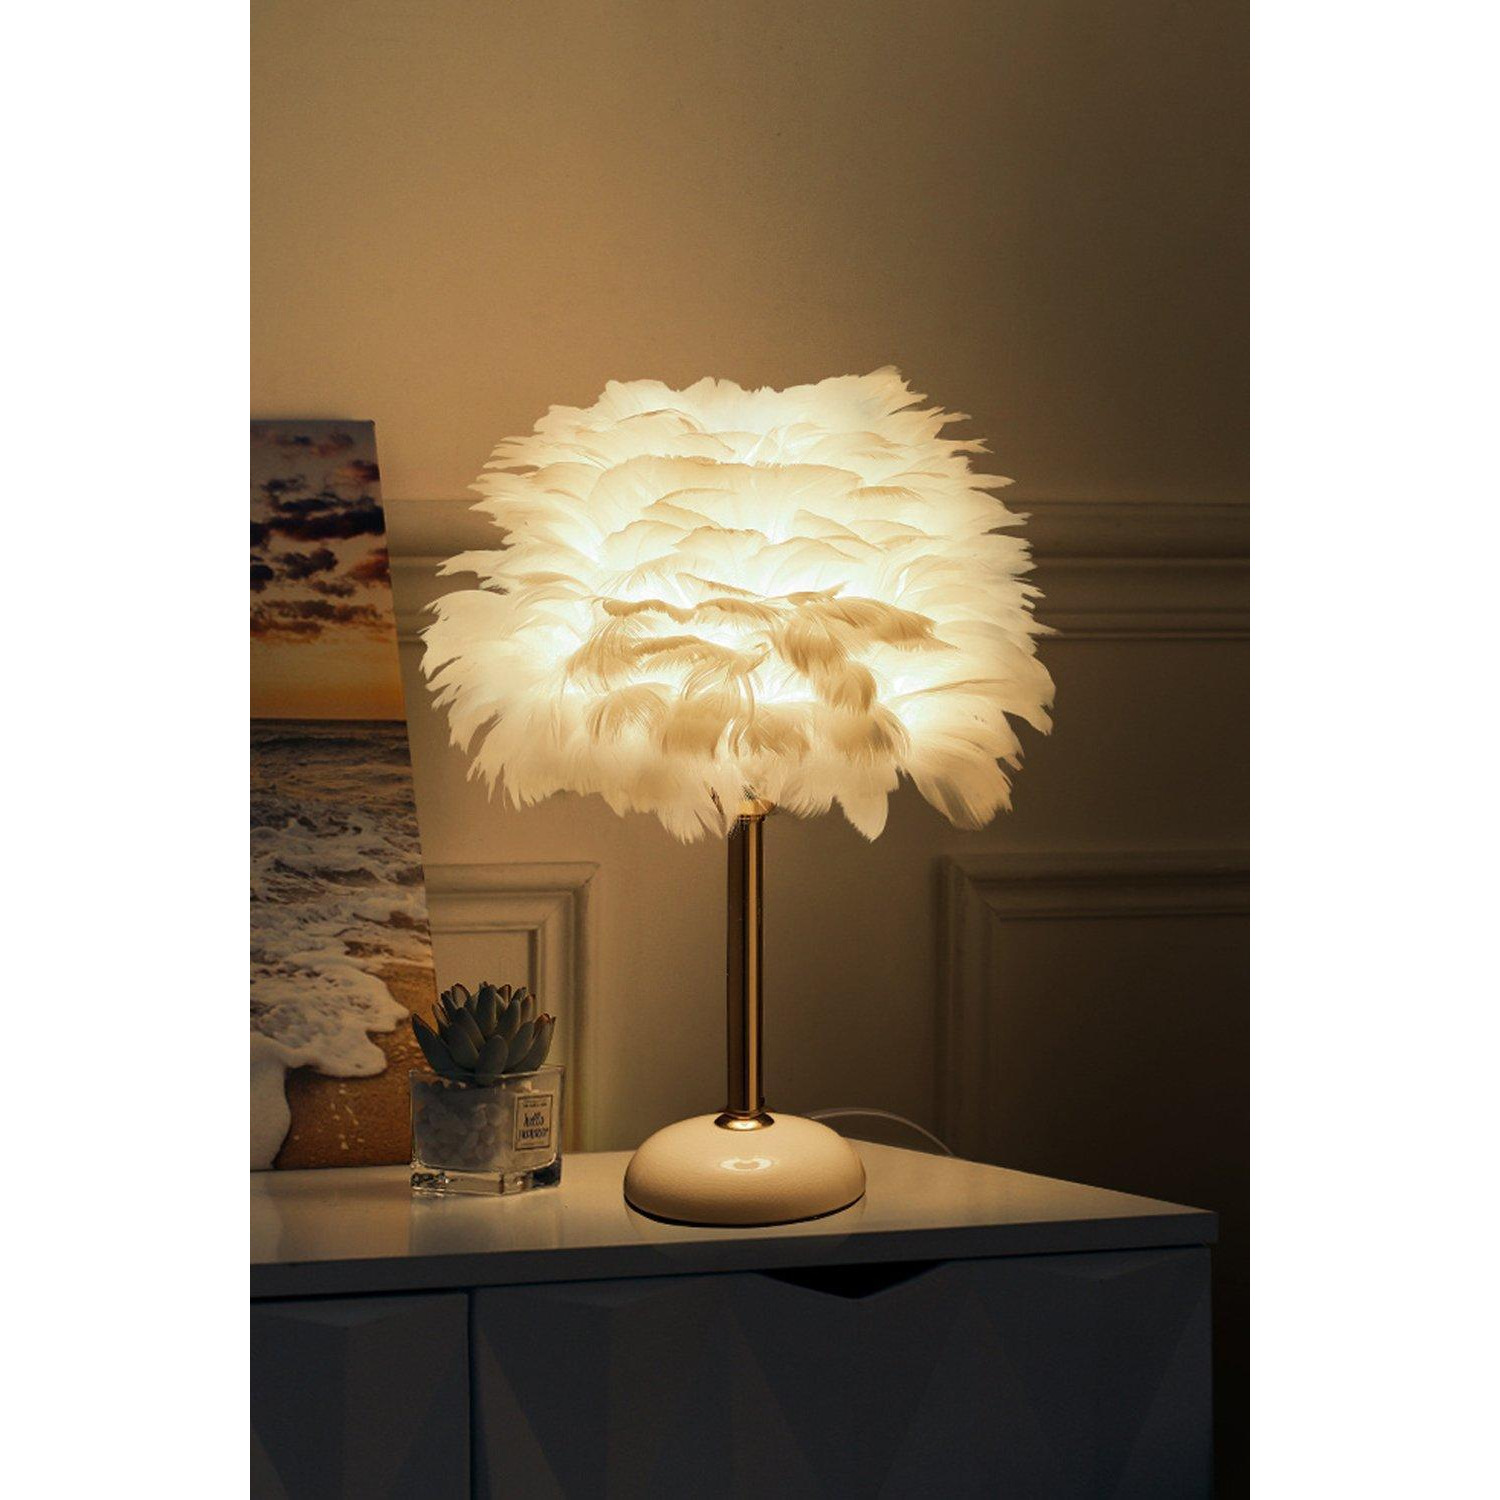 Ceramic Feather Table Lamp with LED Light - image 1